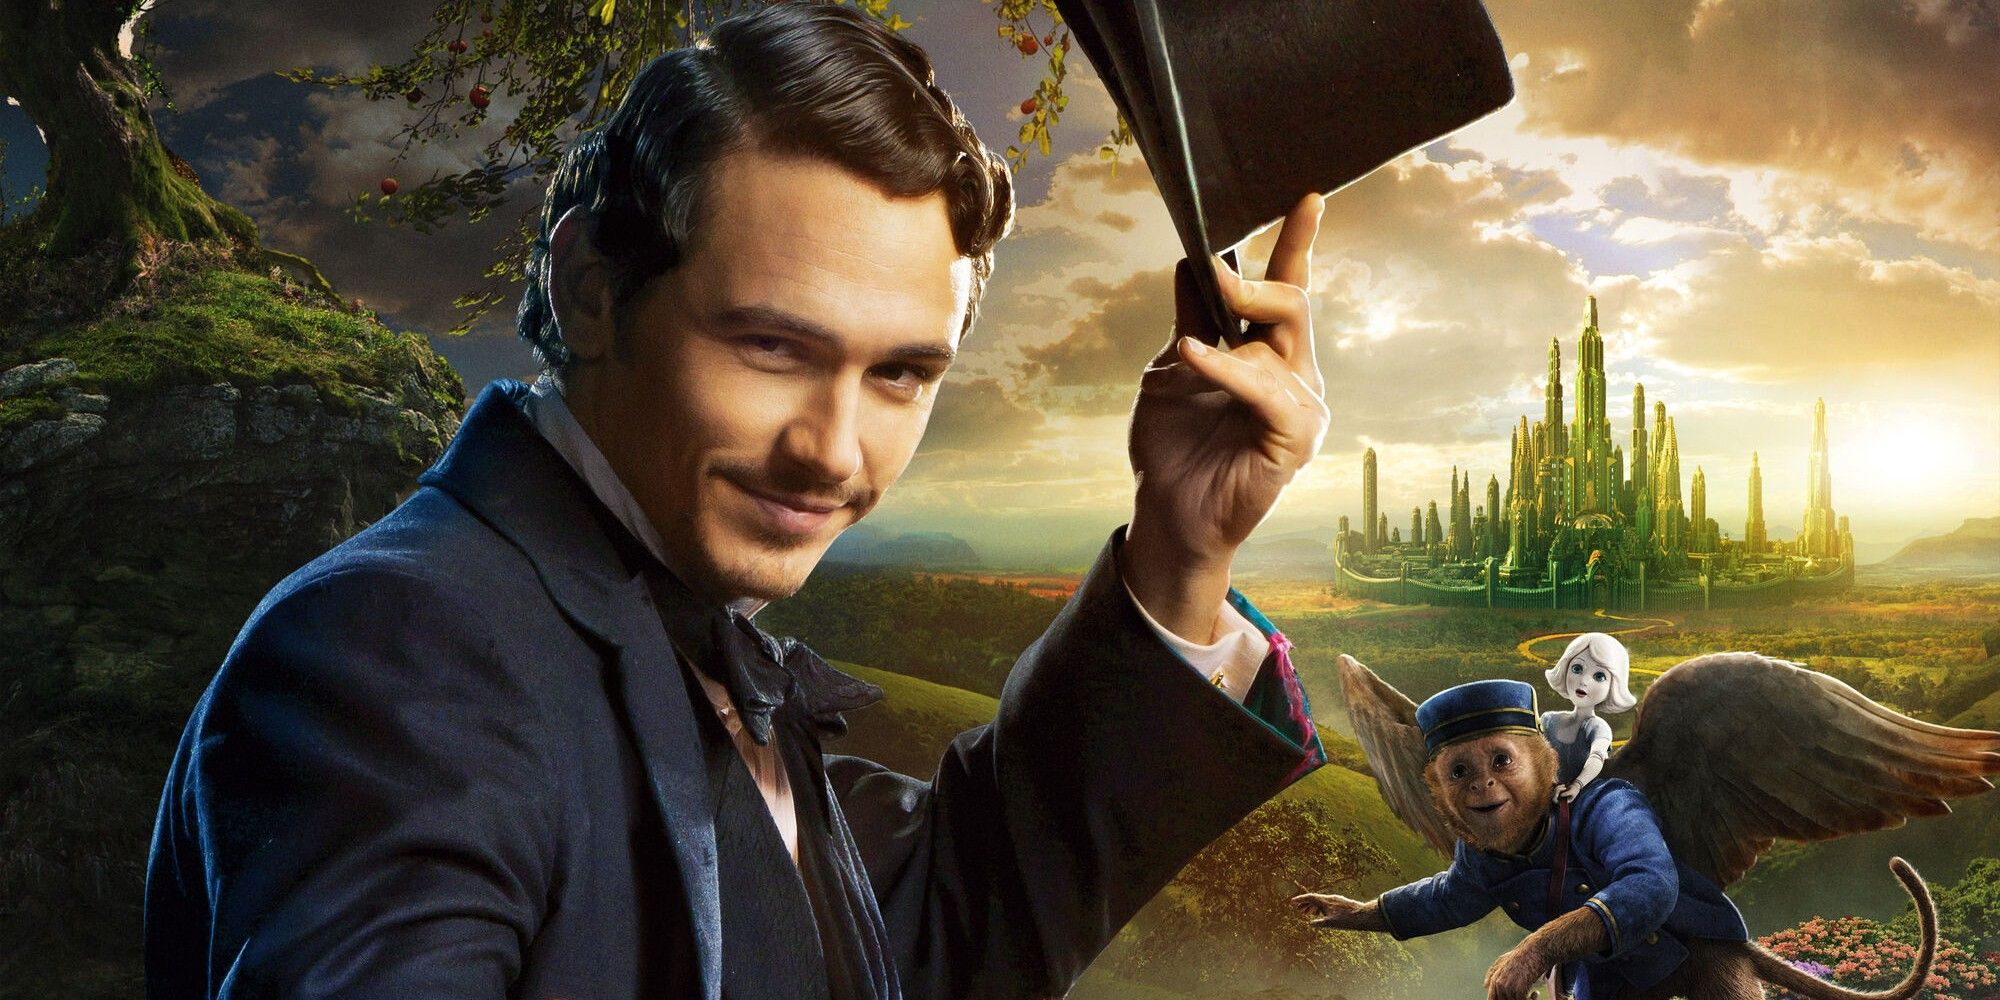 James Franco in Oz the Great and Powerful